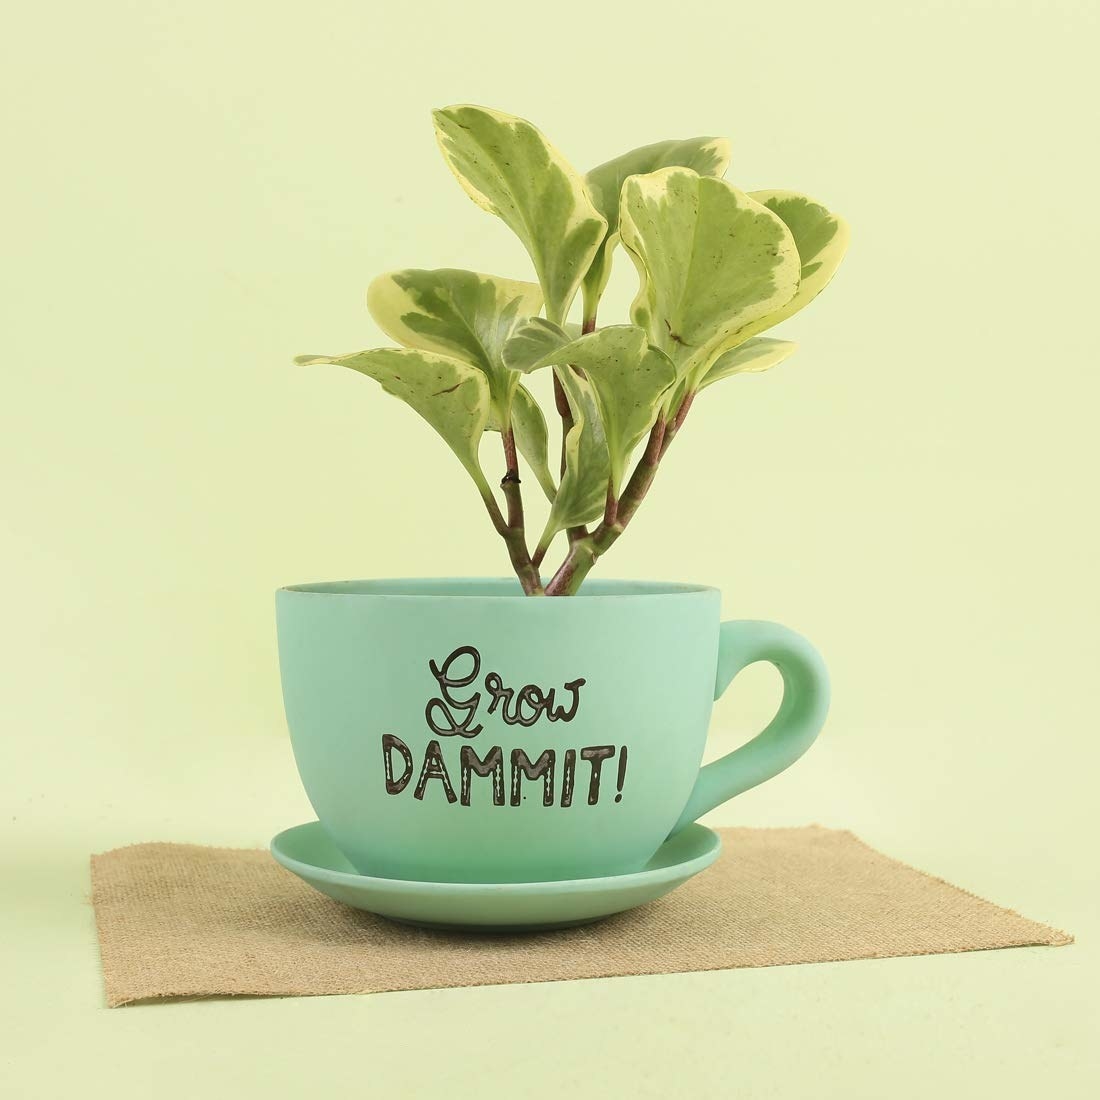 A teal coloured planter in the shape of a teacup and saucer with the words &quot;Grow Dammit!&quot; on it.